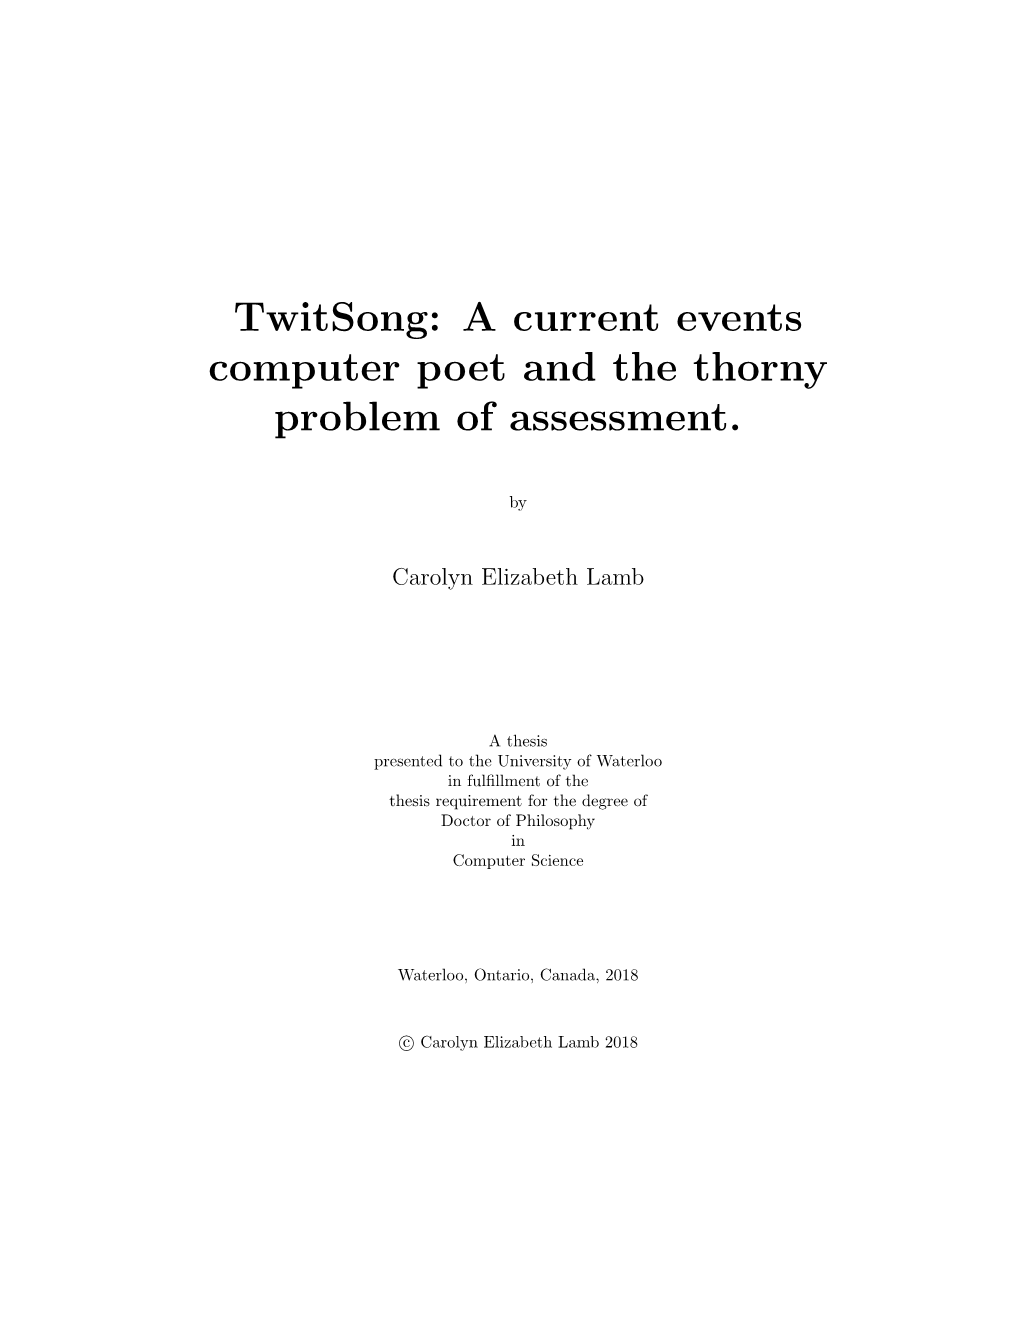 Twitsong: a Current Events Computer Poet and the Thorny Problem of Assessment